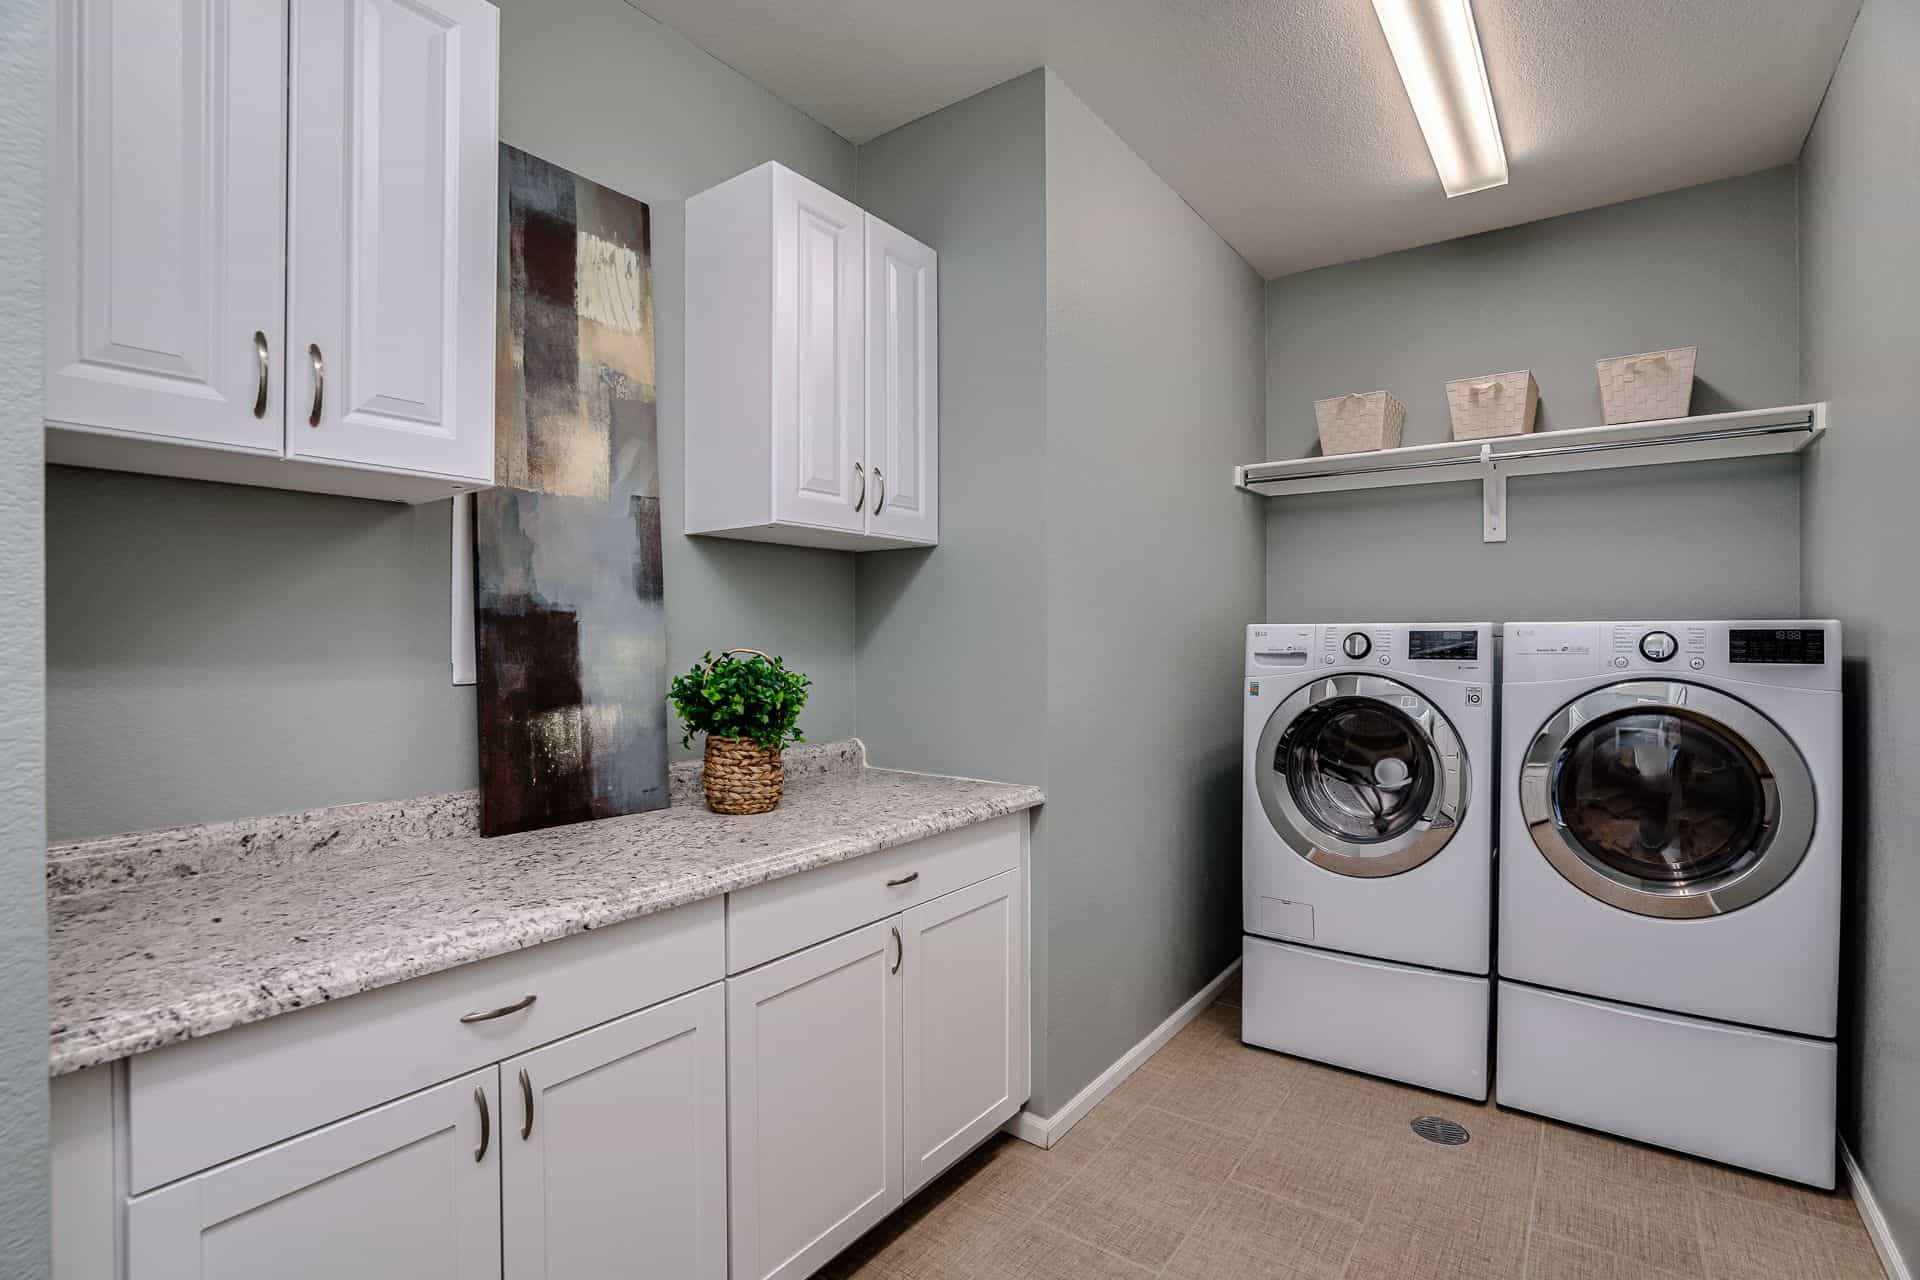 Main Level Laundry Room with Garage Access